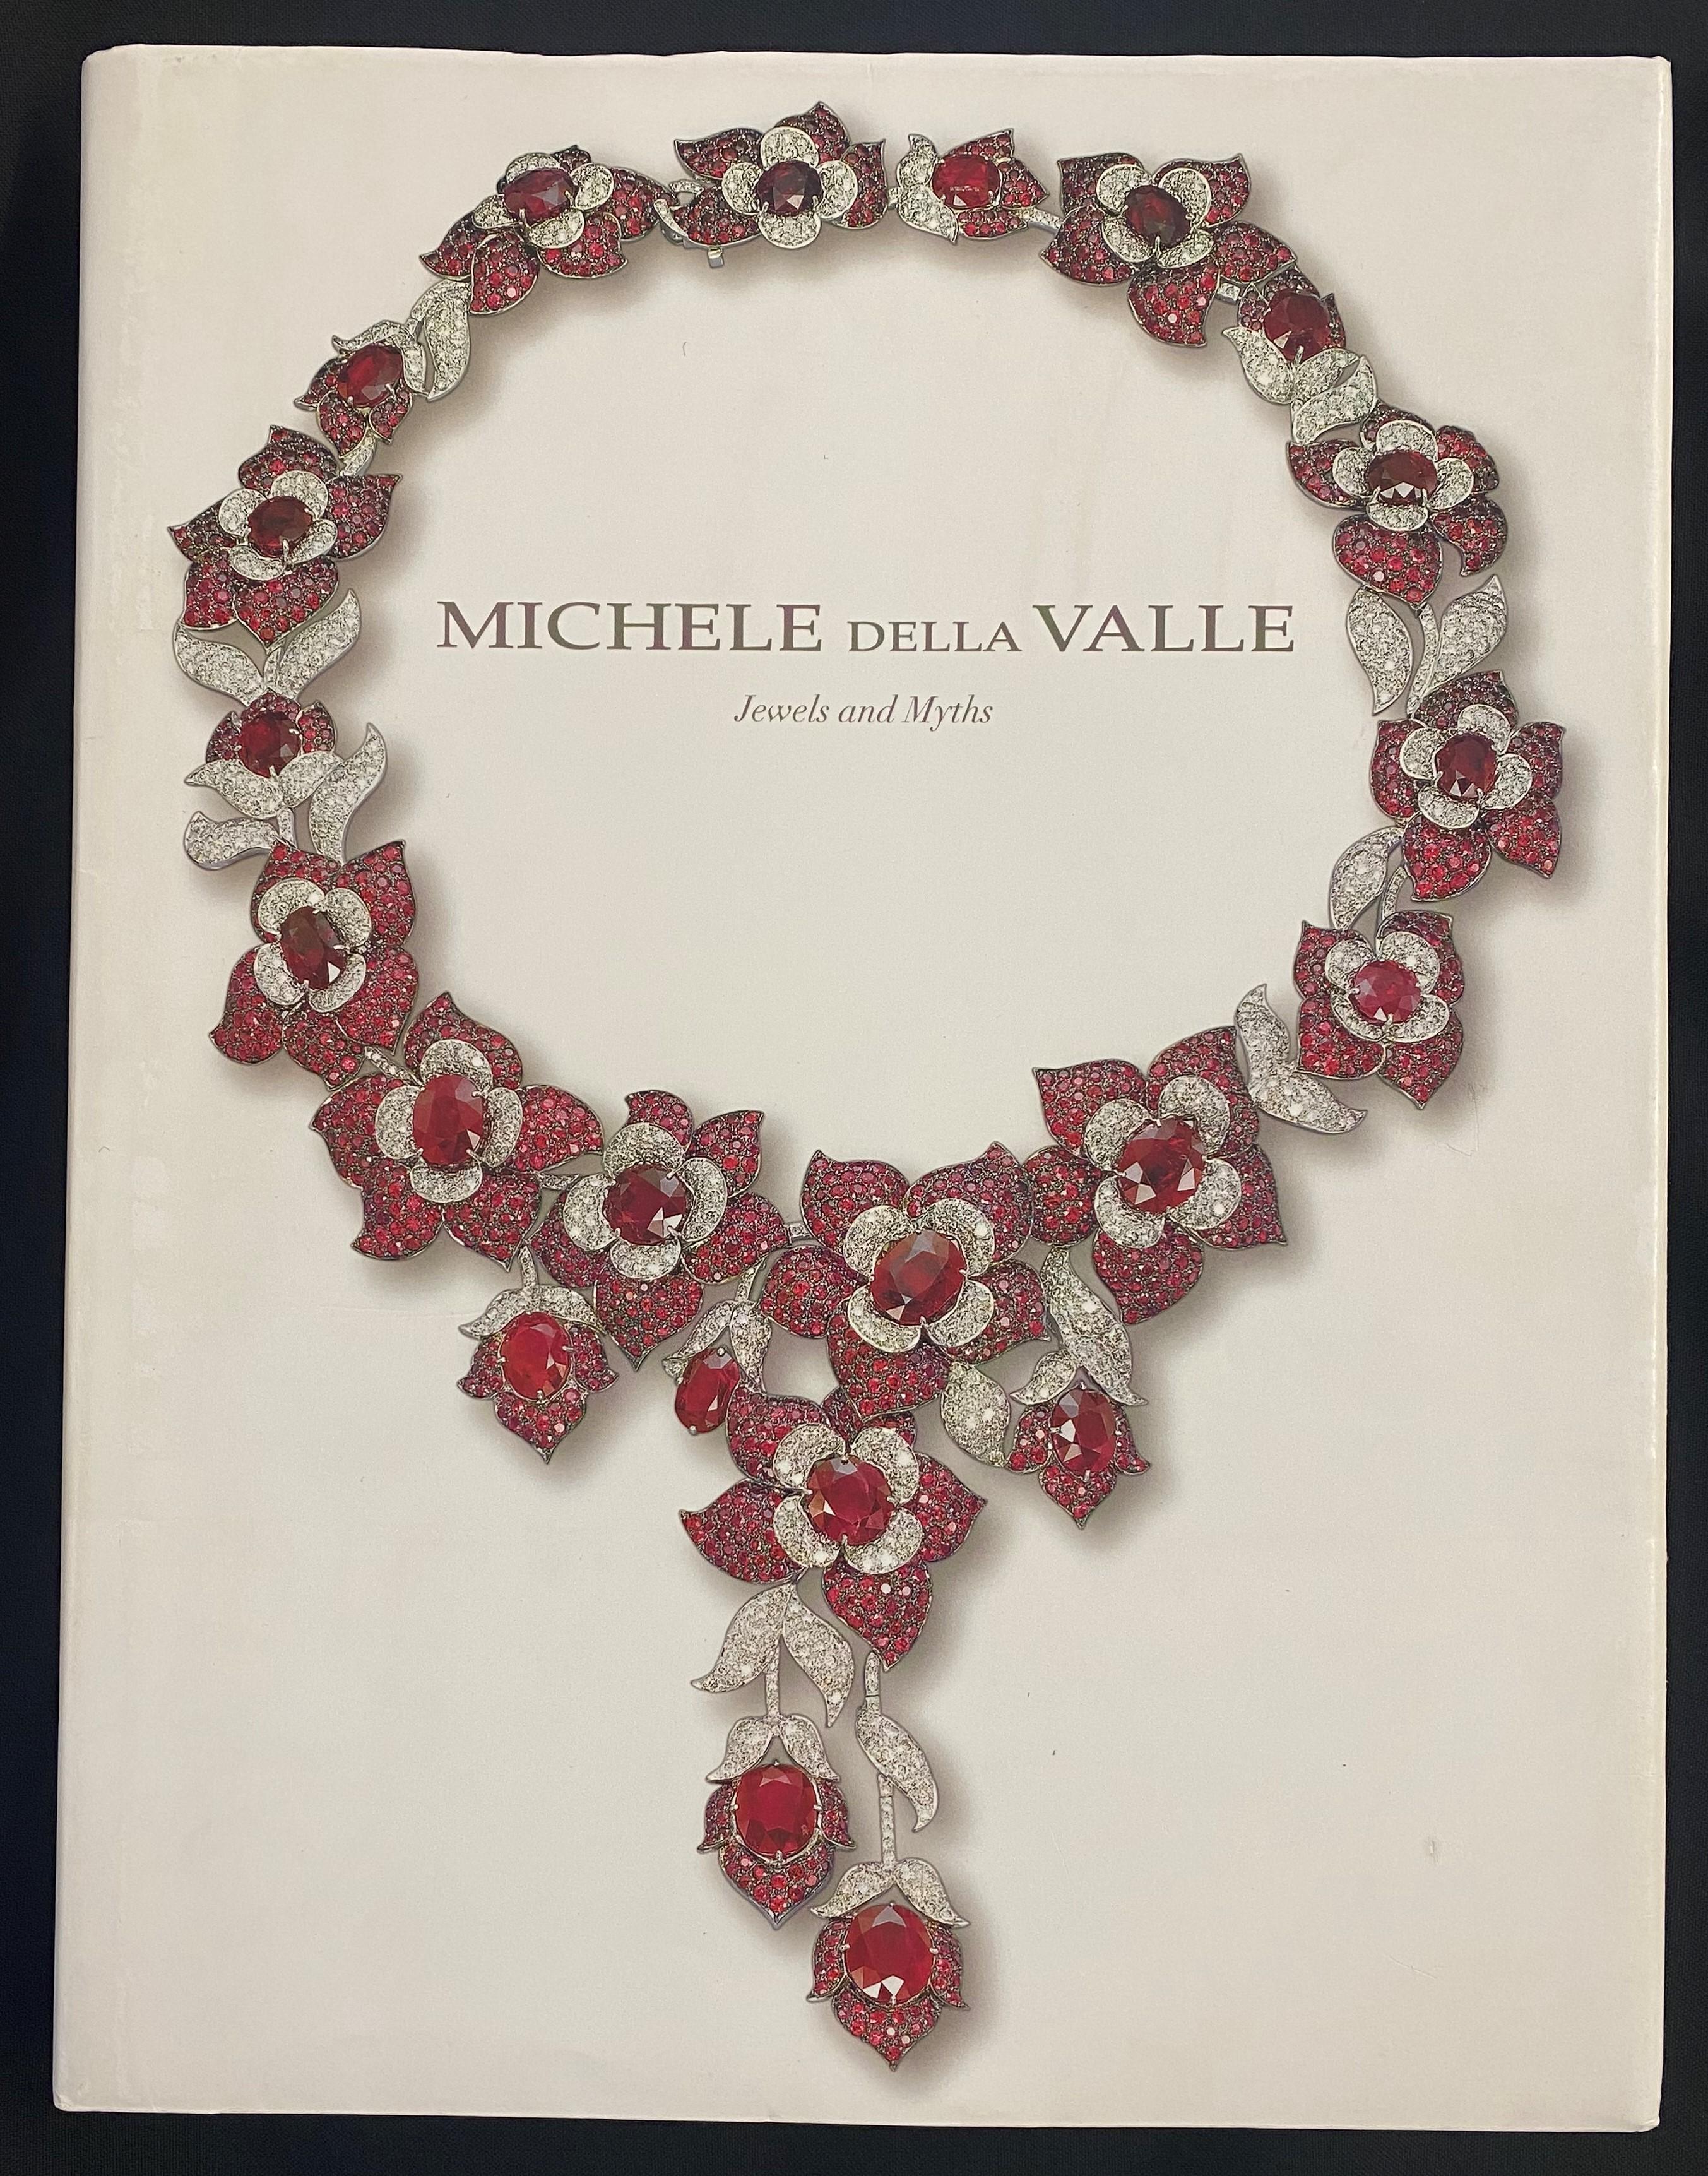 Famed for his appreciation of rare and unusual gemstones, Michele della Valle is unquestionably one of the leading jewellers at work in the world today. His idiosyncratic style pays tribute to his greatest inspiration, nature, which continues to